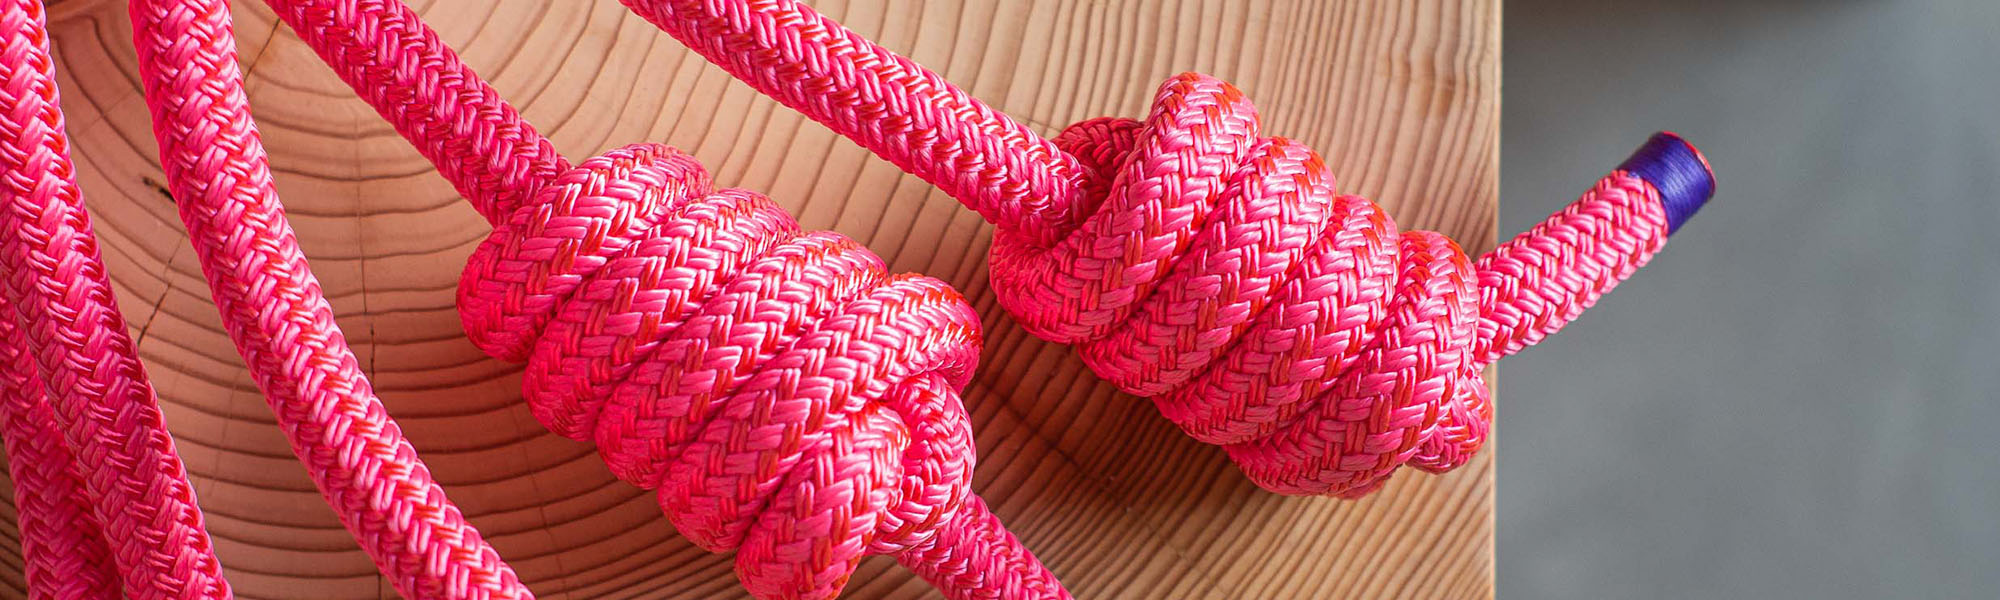 Octomoves rope